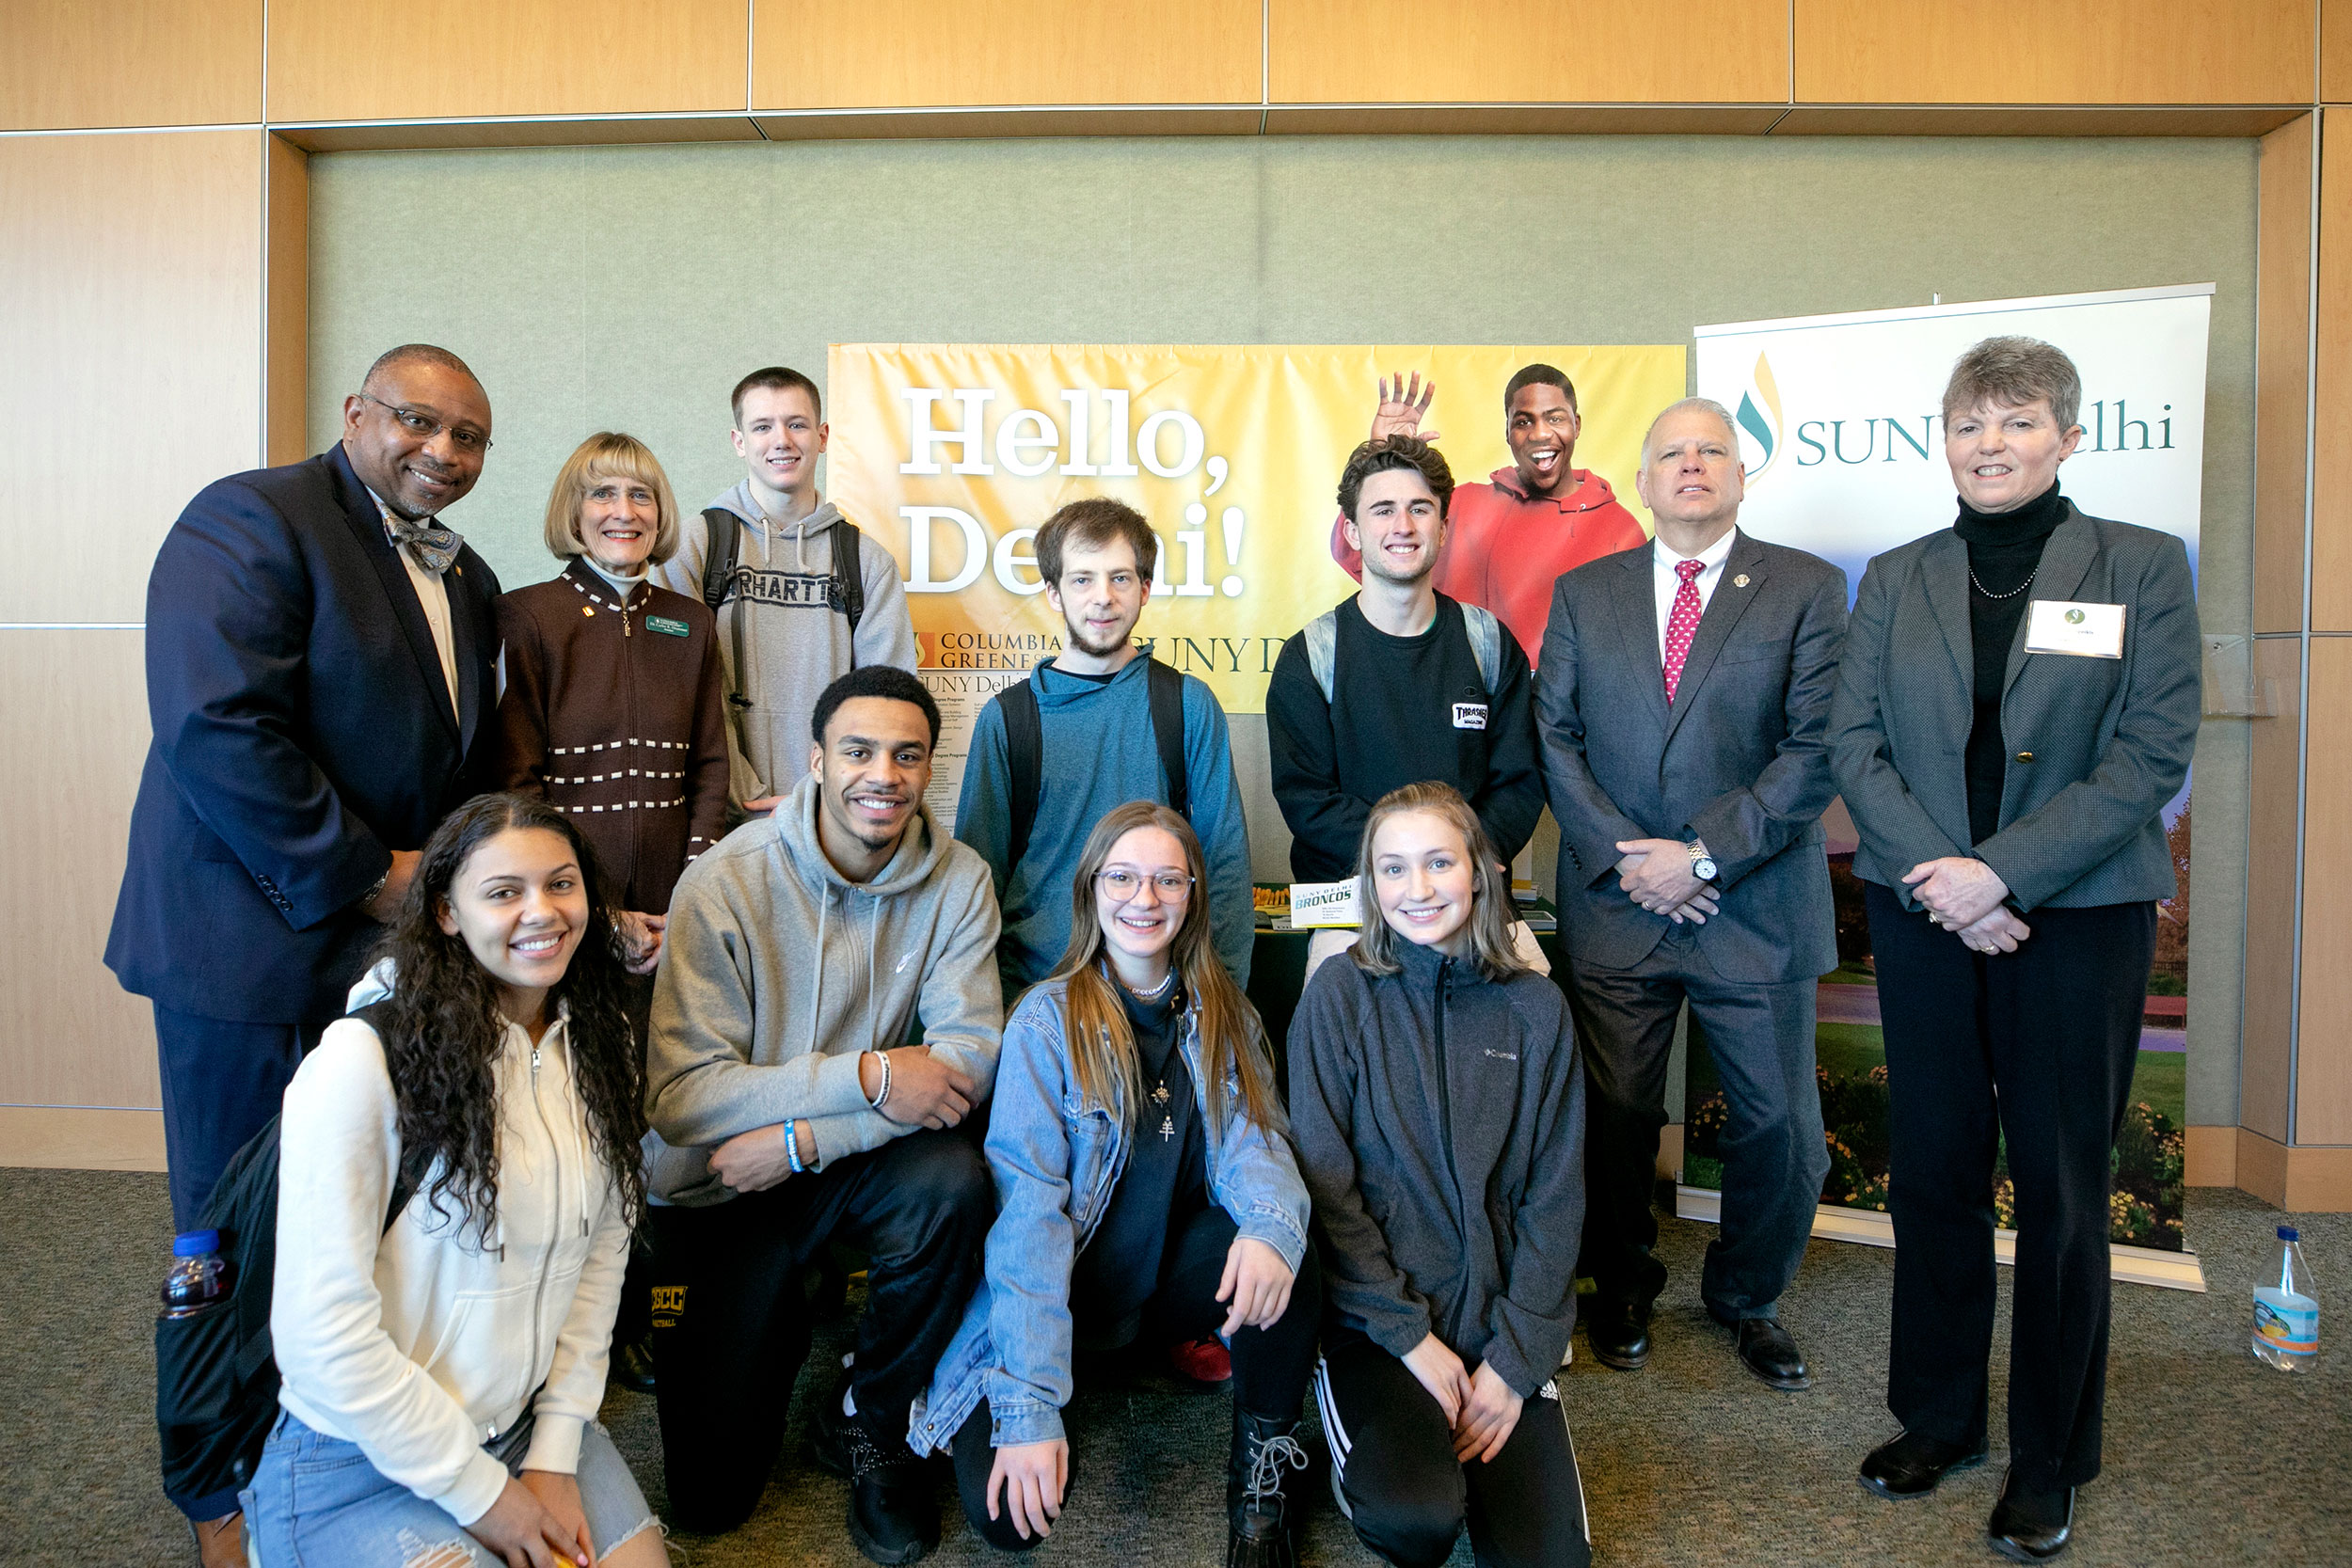 Students, Provost and President pose for a picture